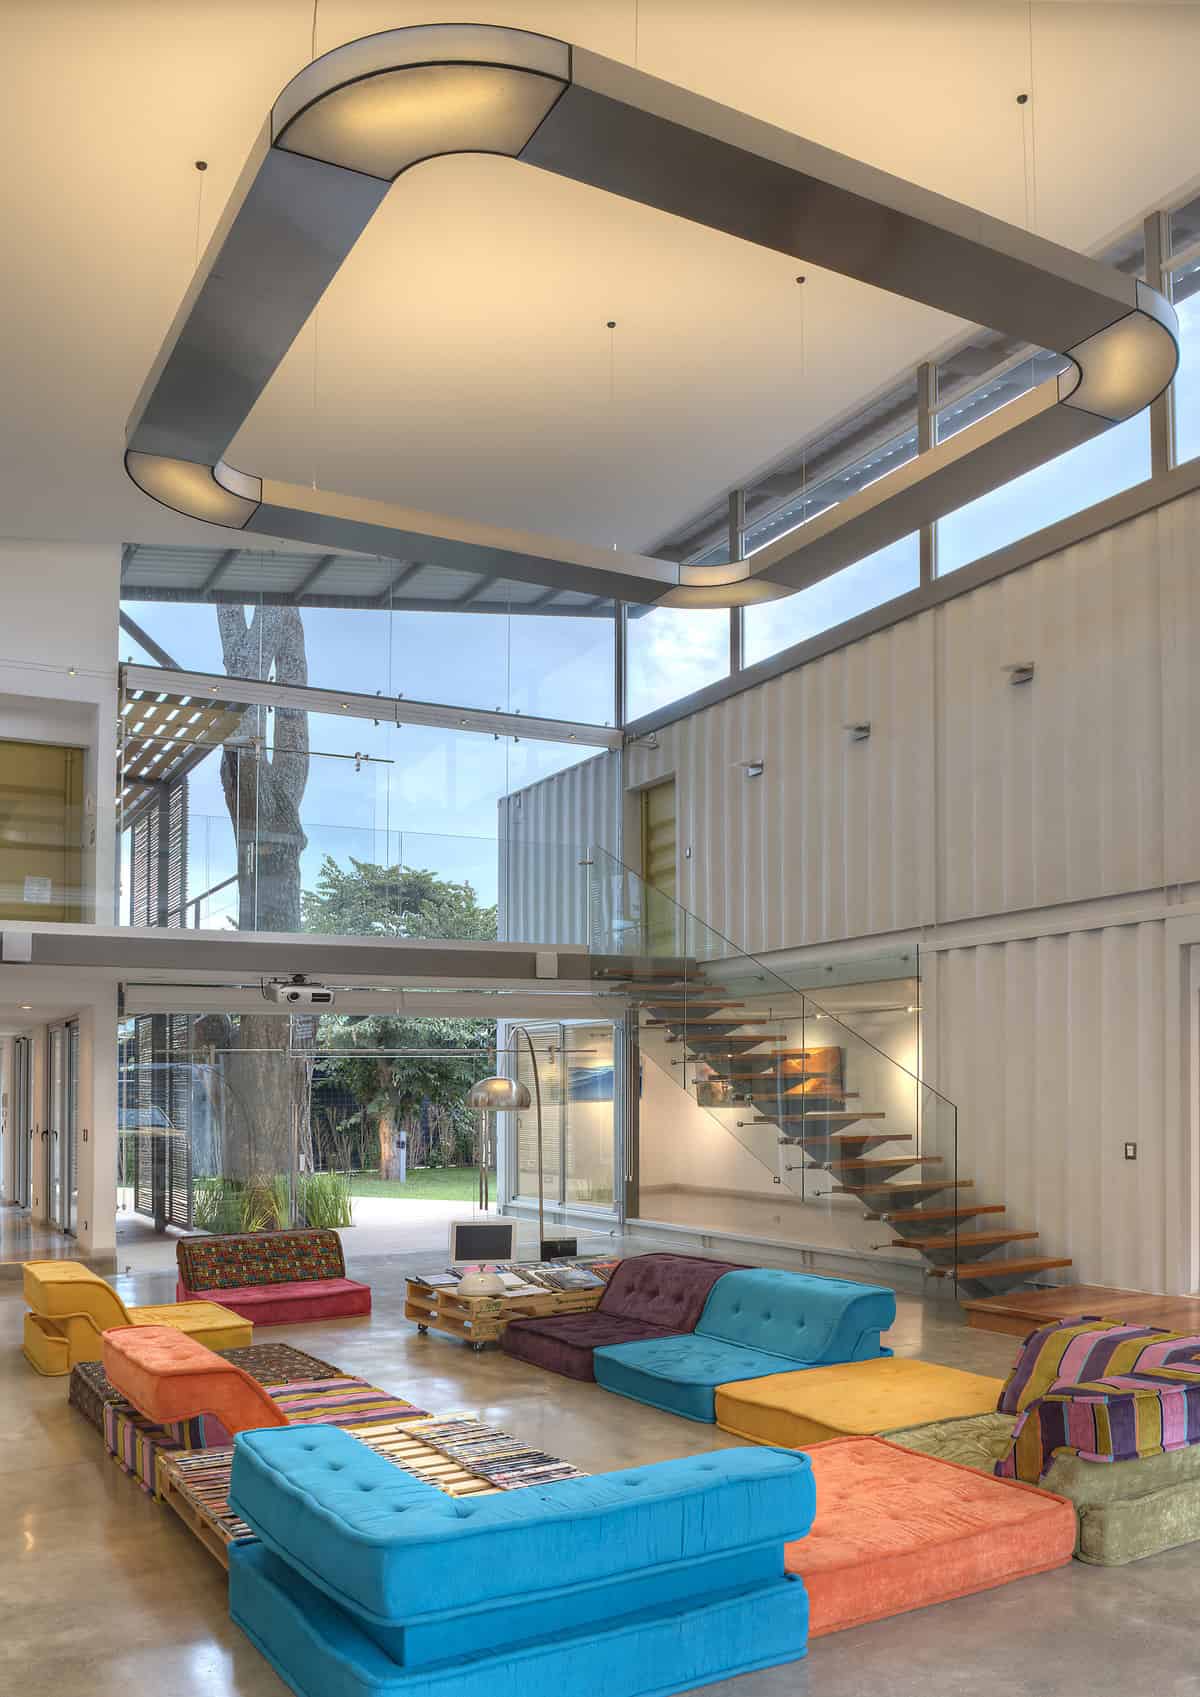 8 Shipping Containers Make Up a Stunning 2-Story Home | Modern House